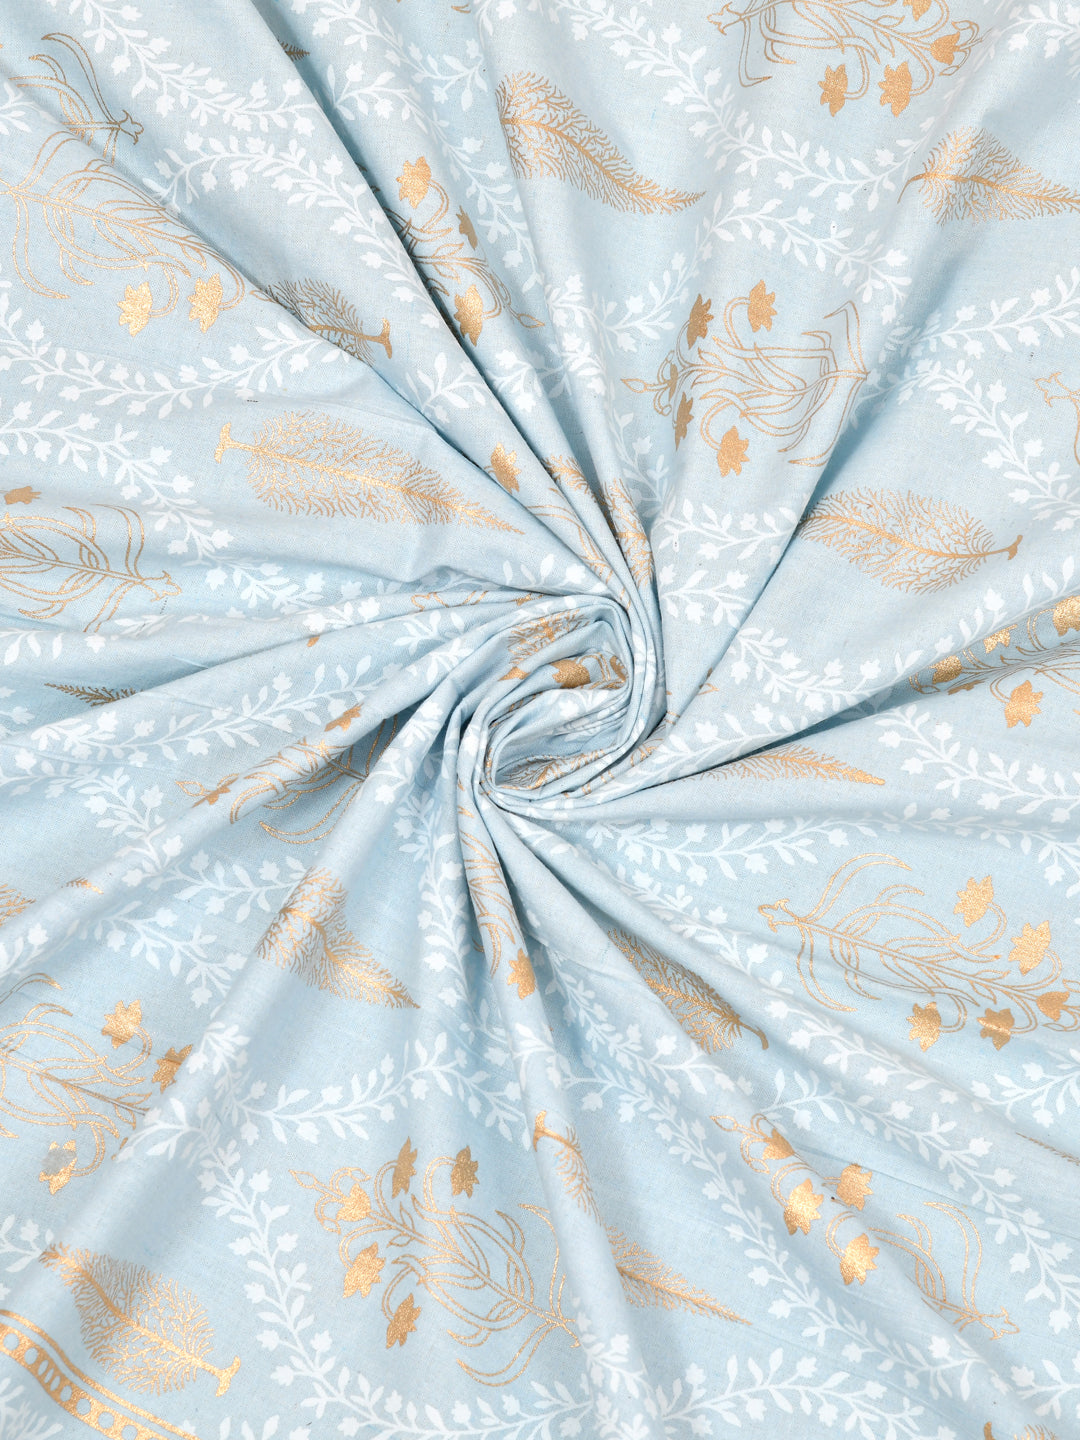 Cotton 250TC King Size Bedsheet With 2 Pillow Covers; Golden Motif On Powder Blue